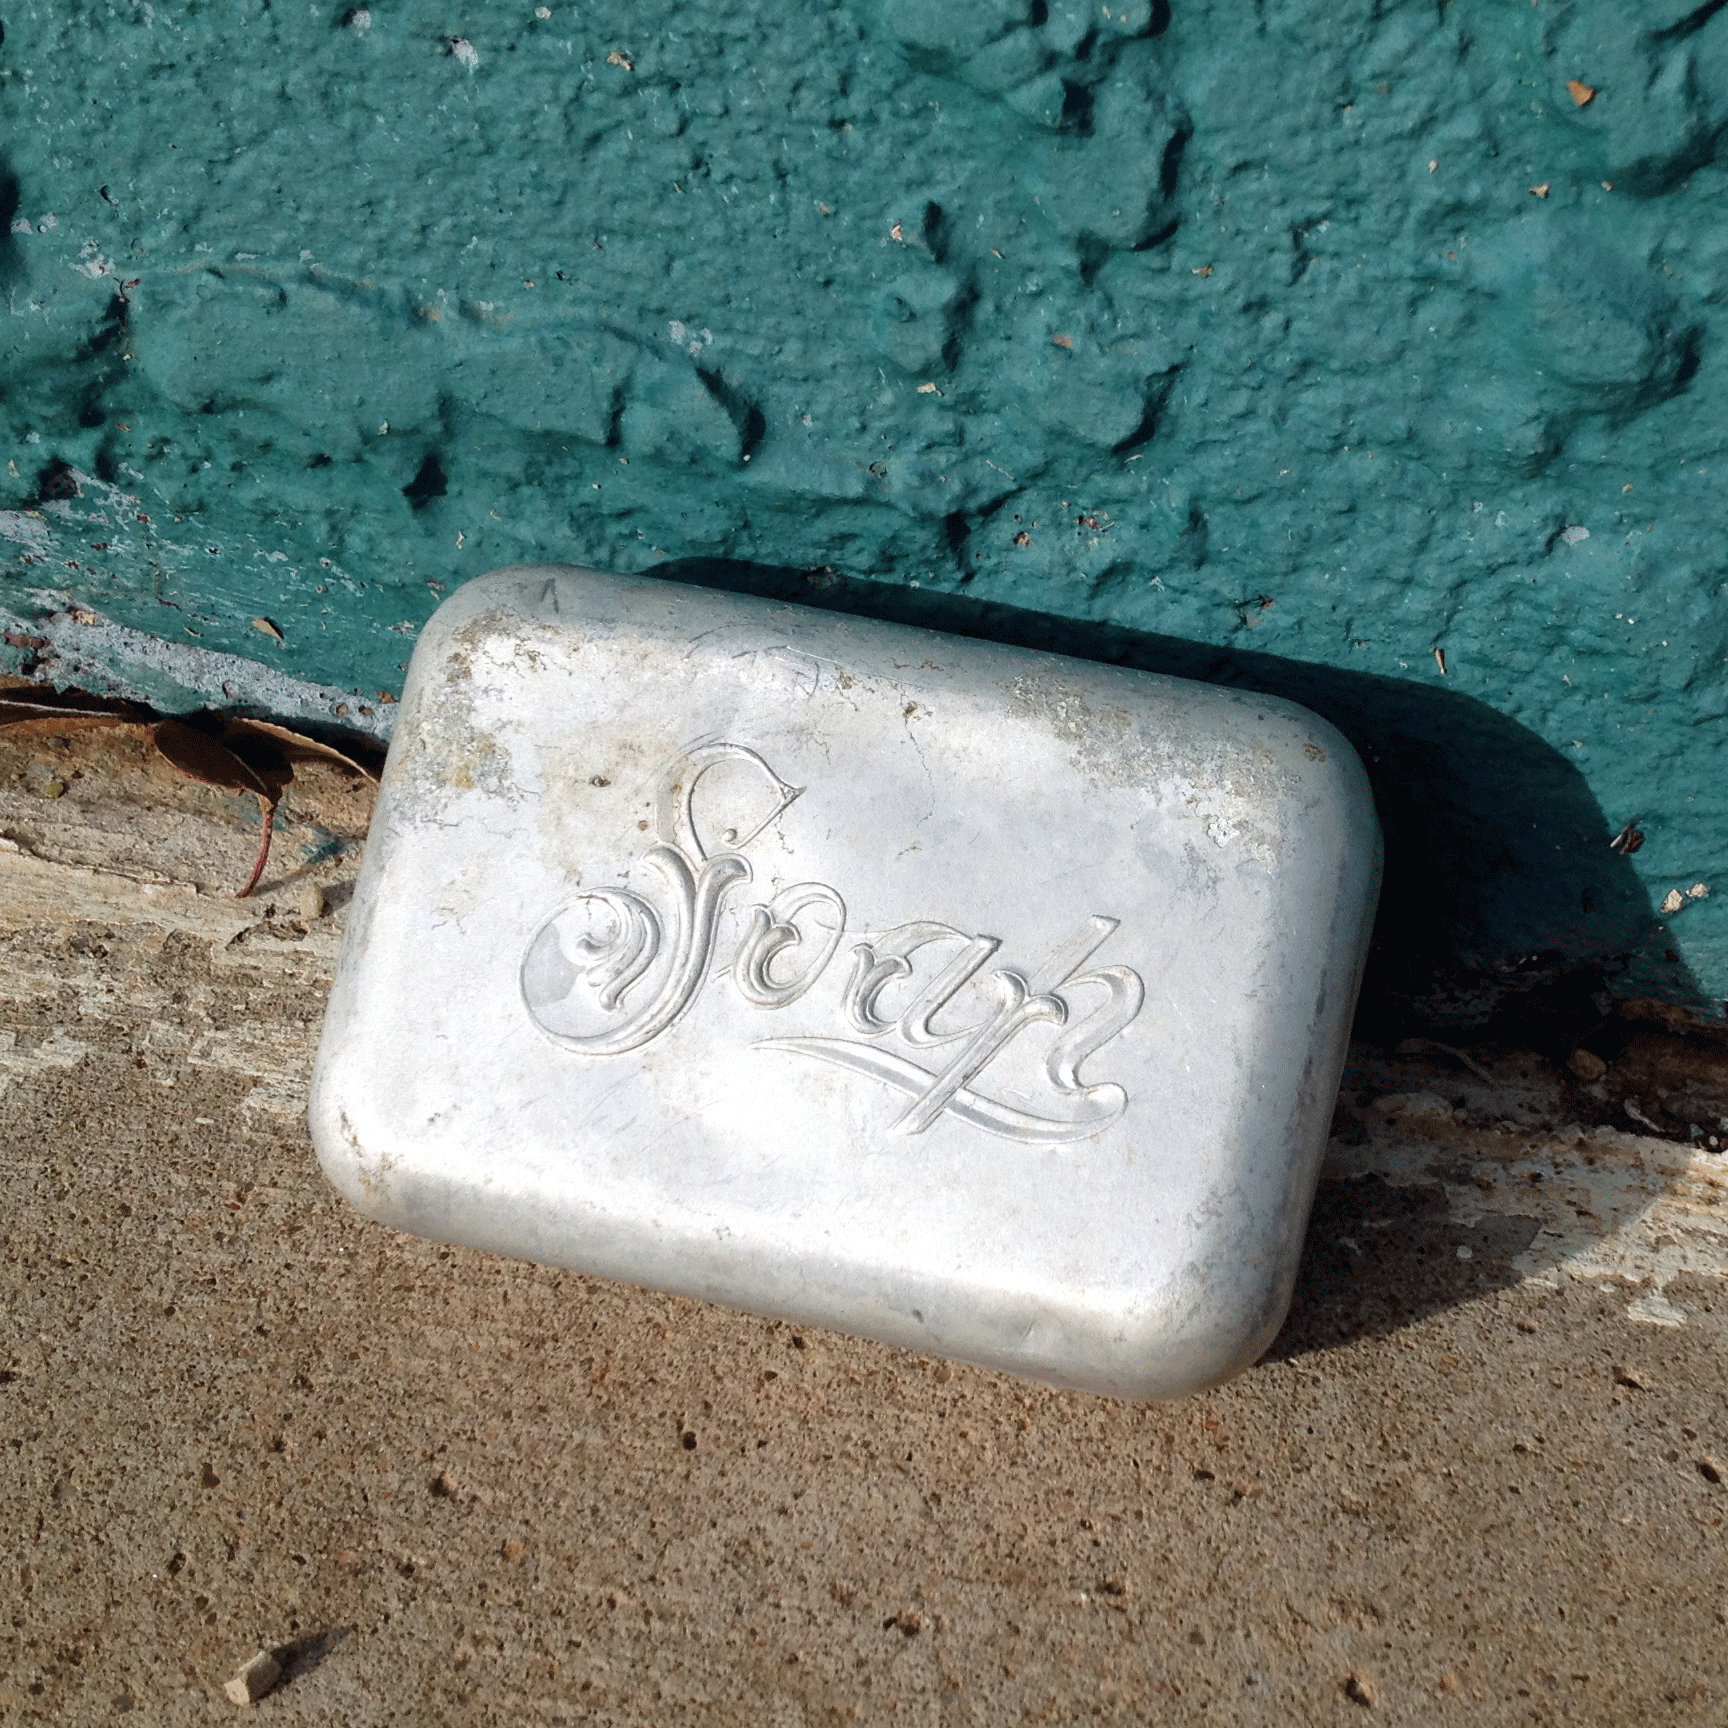 You'll keep yourself tidy courtesy of the soap you'll store in this adorable 1950s aluminum travel box.